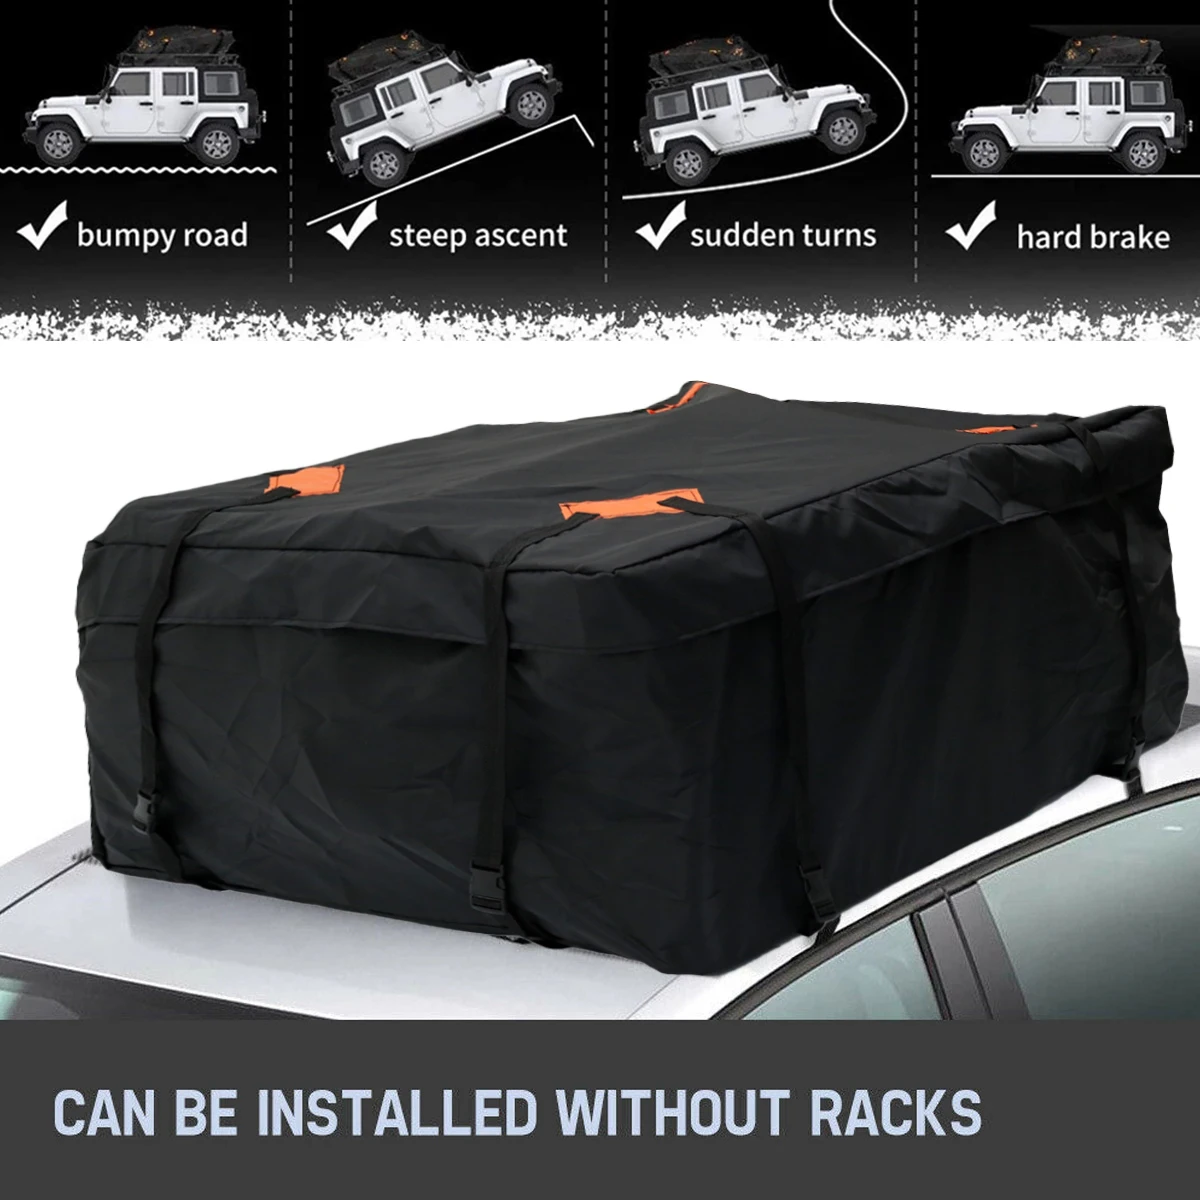 Wubxbvvx Black Heavy Duty RoofBag Waterproof Car Cargo Roof Bag 420D Oxford Cloth Rooftop Cargo Carrier 